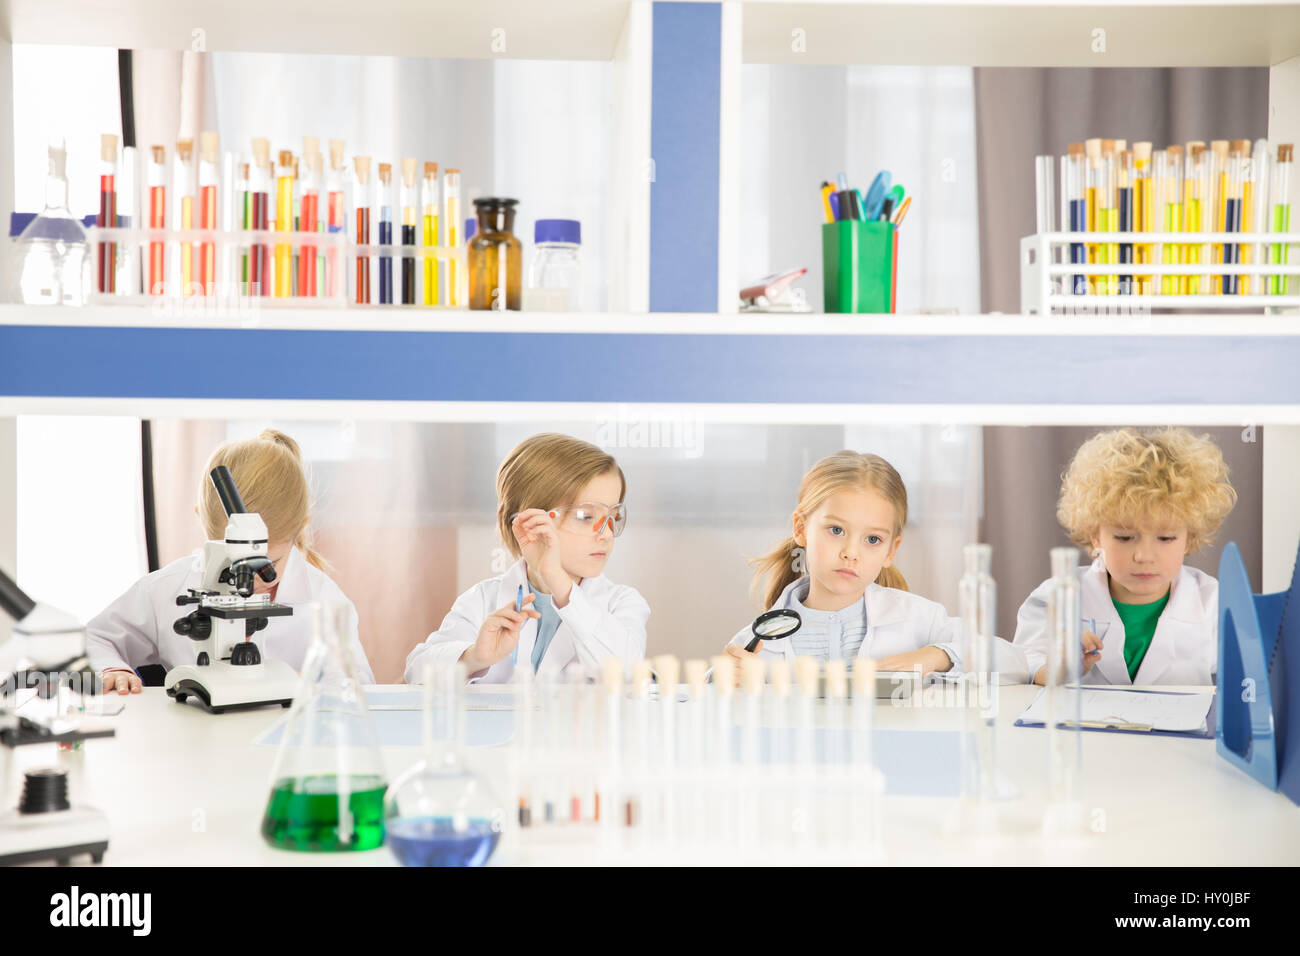 Schoolchildren in lab coats studying together in chemical laboratory Stock Photo